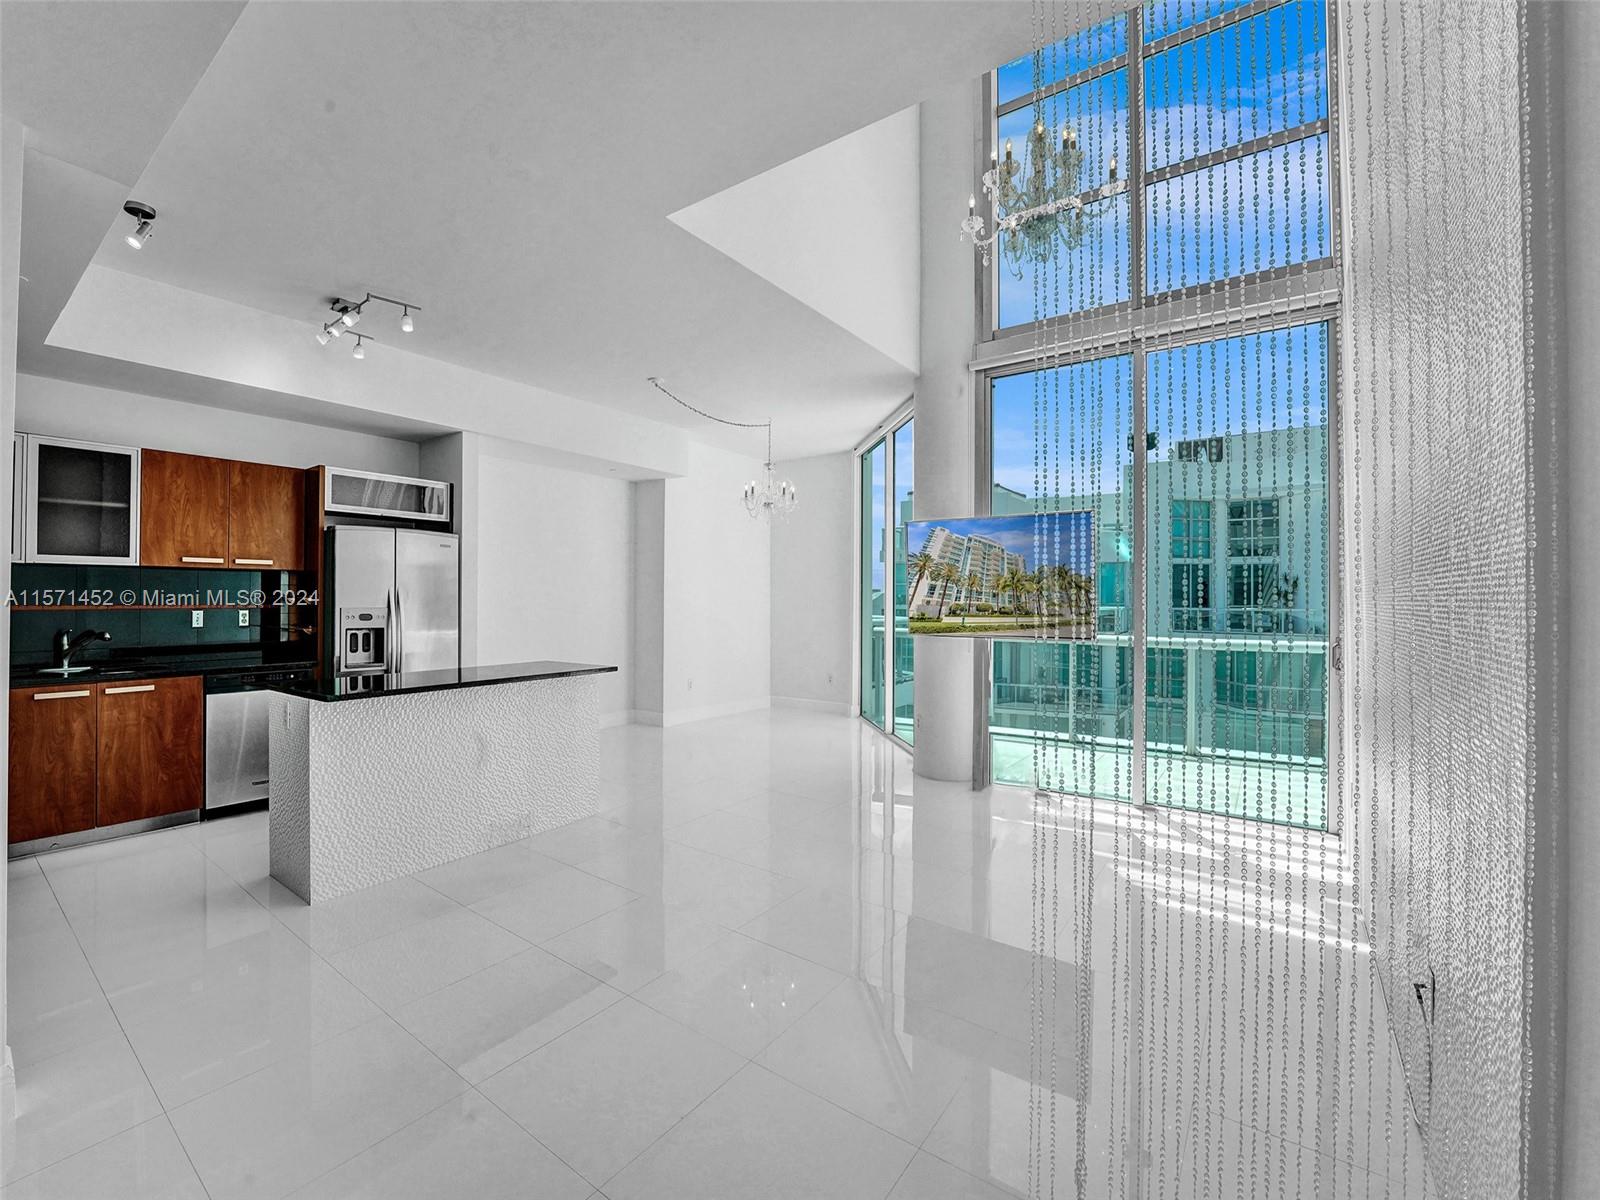 Experience luxury living in this stunning two-story penthouse in the heart of Aventura inside "The Atrium." Recently renovated, this bright, snow-white, and luxury residence boasts two bedrooms plus a den, two and a half baths, and not one but two private rooftop terraces offering breathtaking views. The kitchen features elegant granite countertops and brand-new Samsung stainless steel appliances. With valet parking, security, a pool, and a fitness center, every convenience is at your fingertips. Plus, enjoy proximity to Aventura's top school next door, shopping destinations, restaurants, and beaches. Live in style in this snow-white sanctuary! 360 DEGREE VIRTUAL TOUR AVAILABLE!